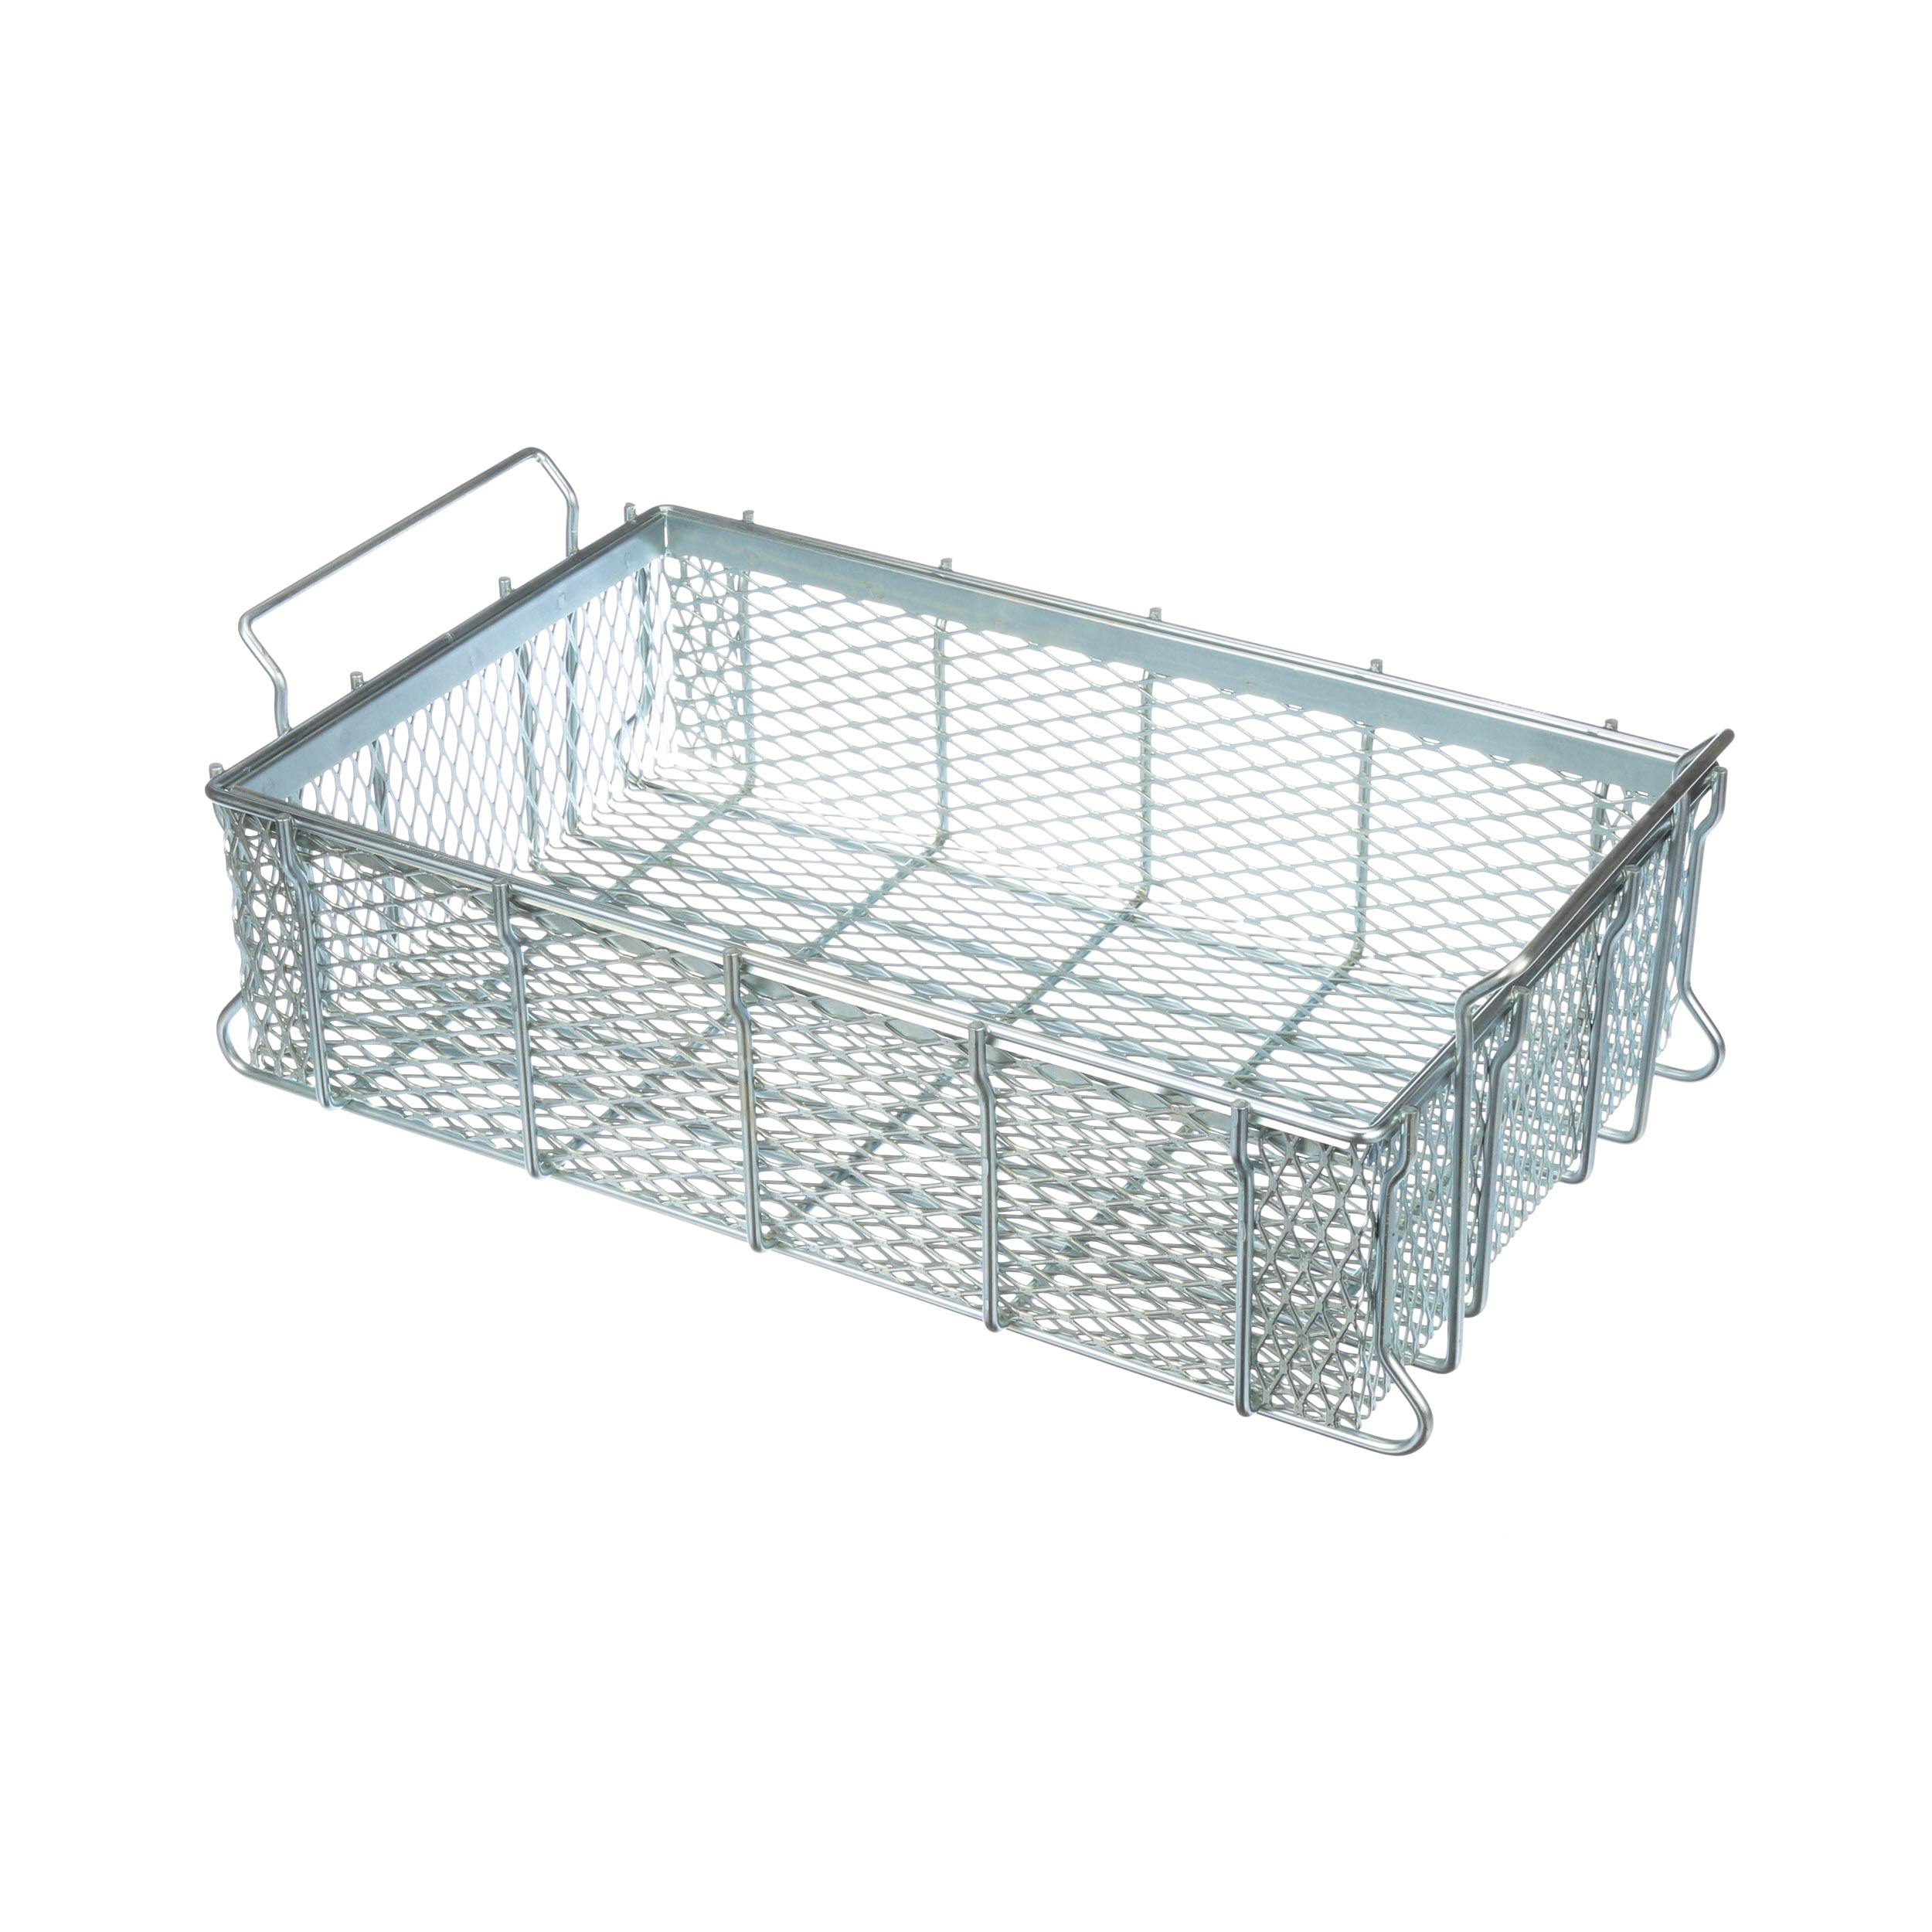 Top Medical Applications for Expanded Metal Baskets